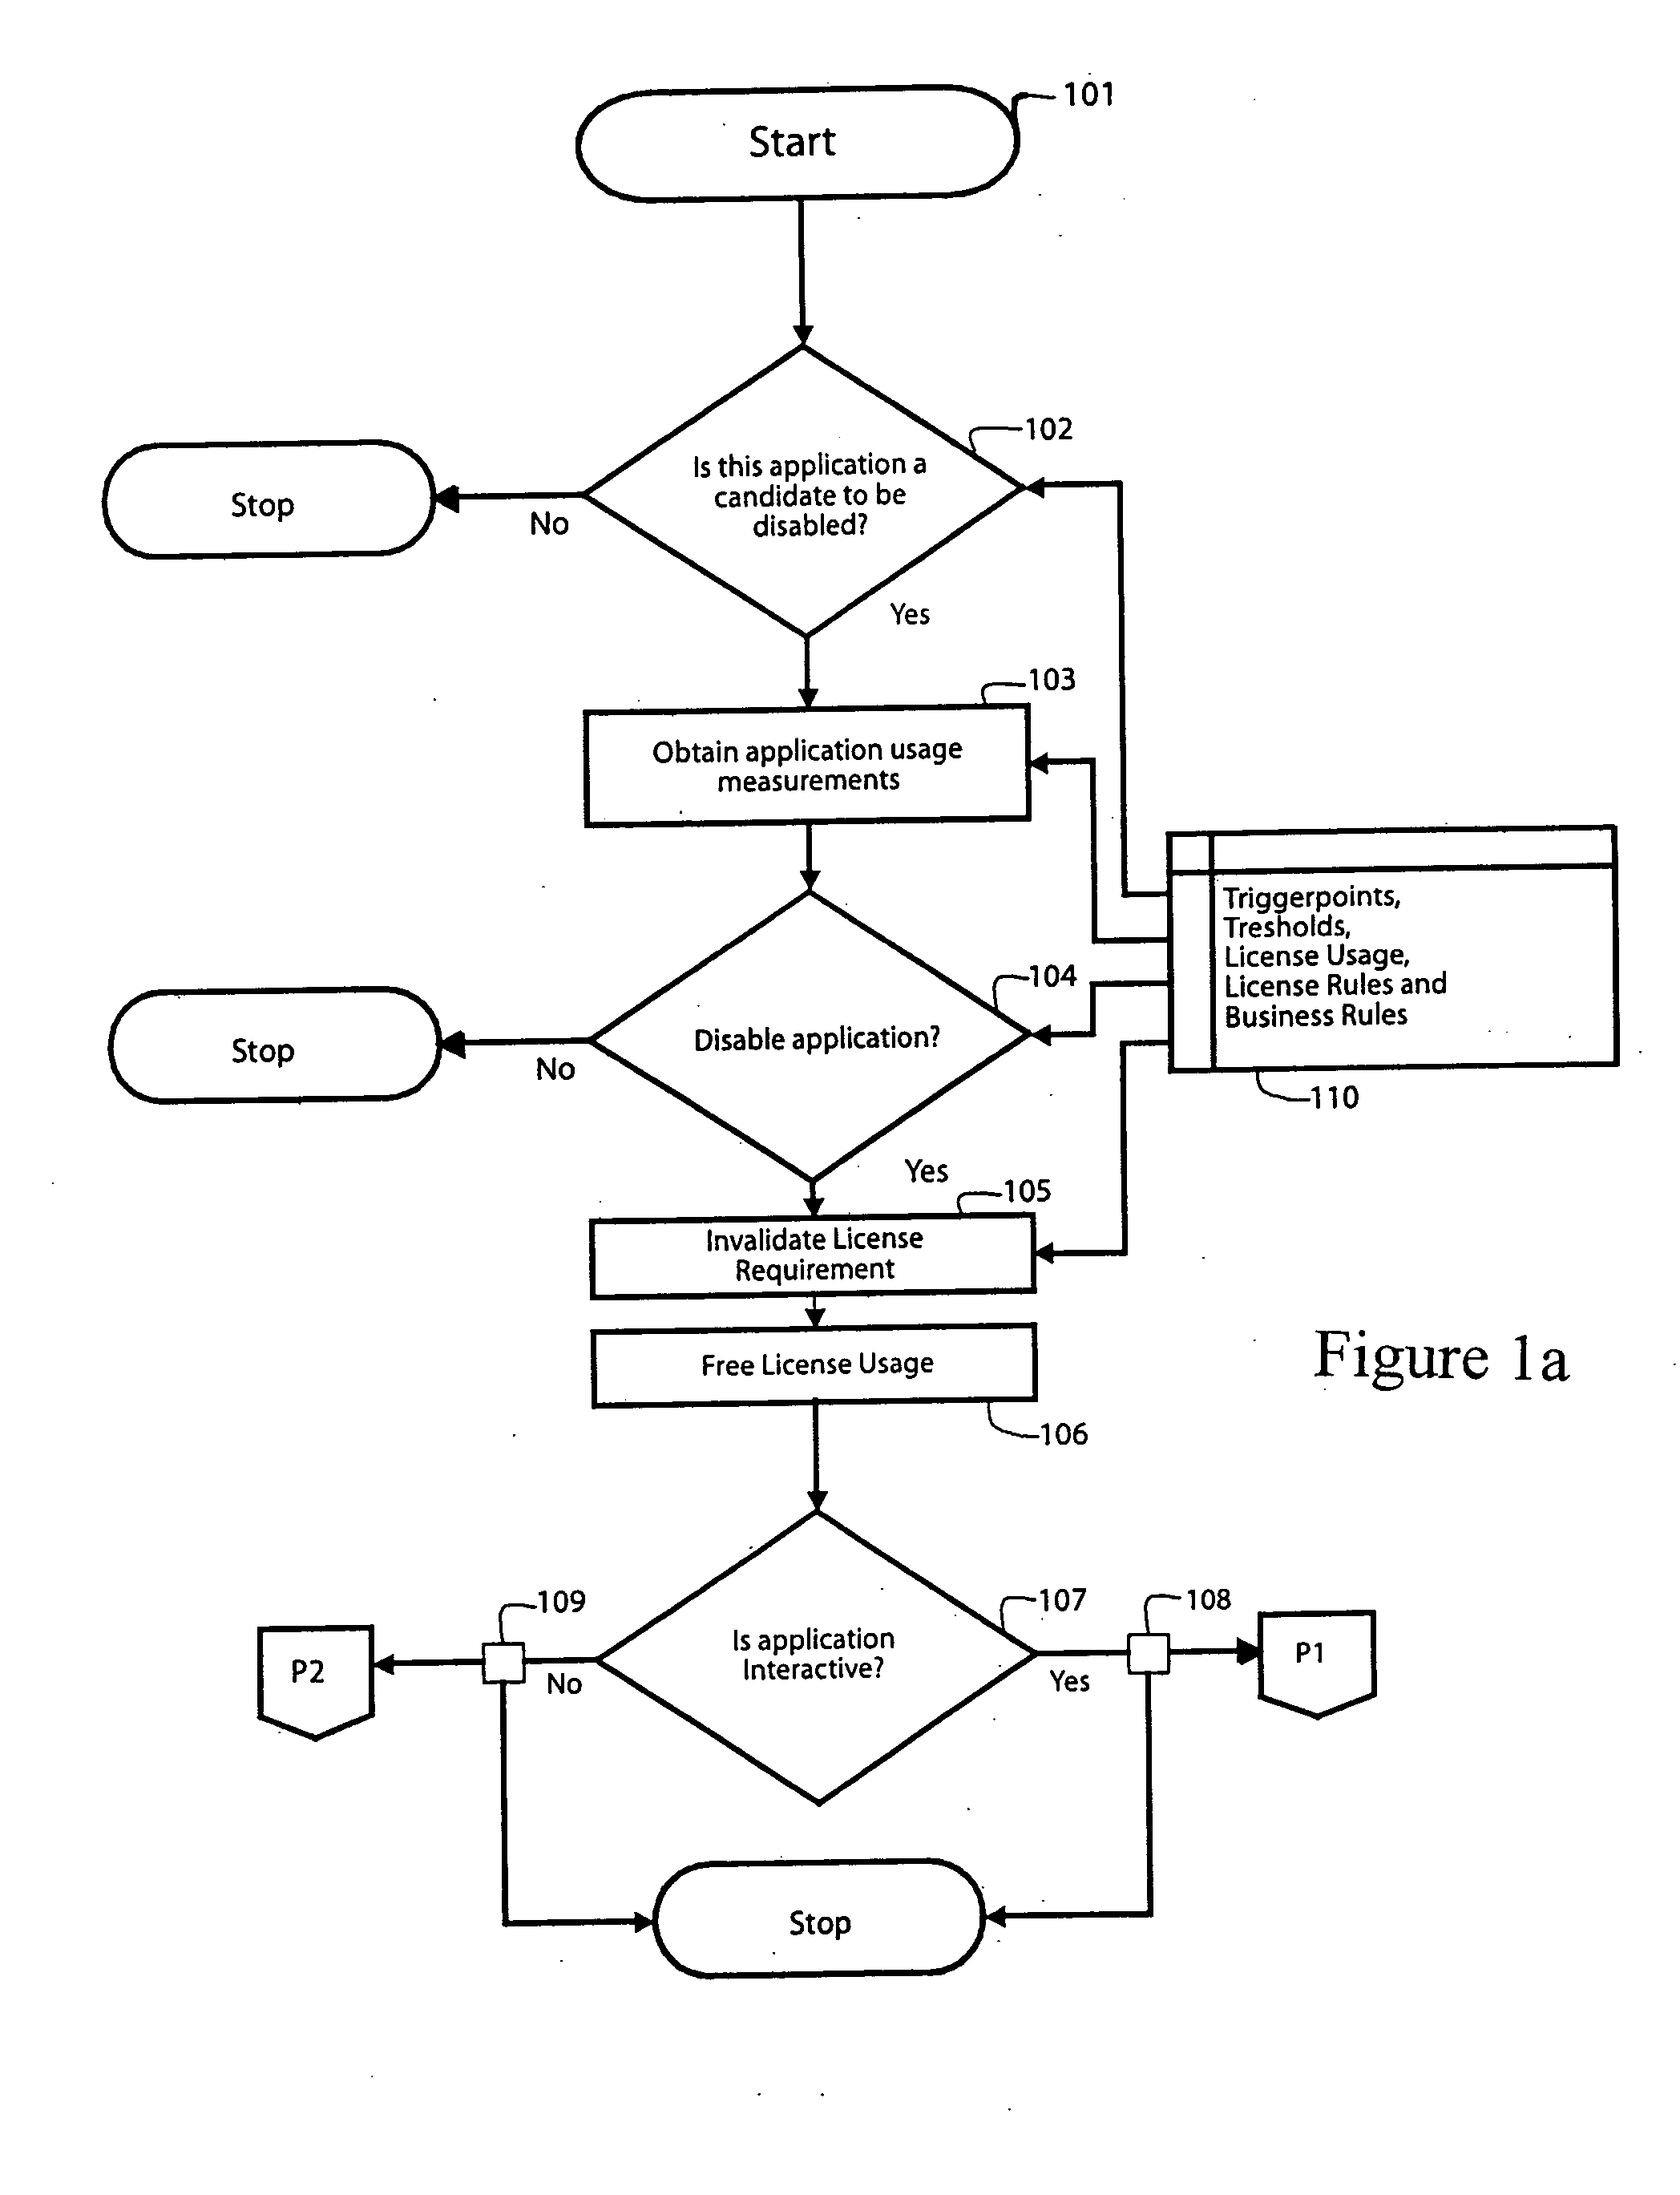 Method and program for automated management of software license usage by monitoring and disabling inactive software products